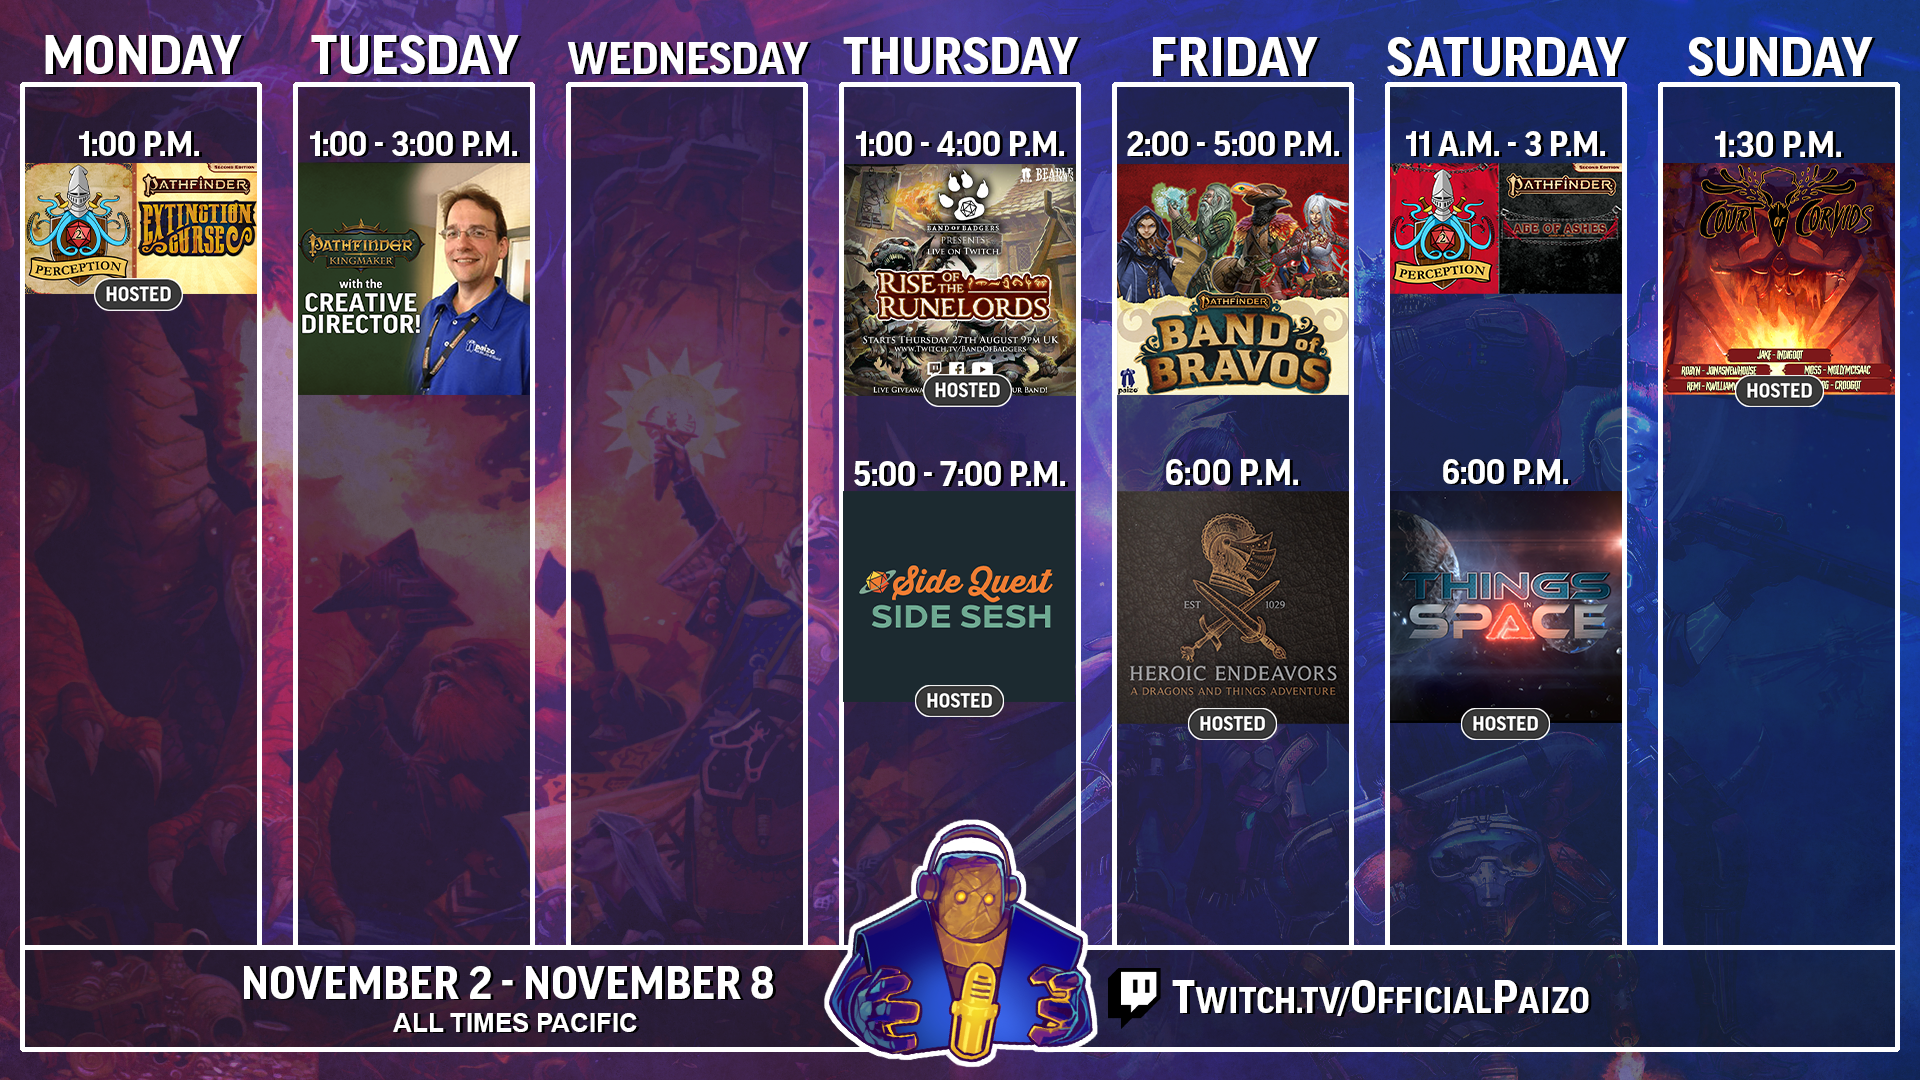 Paizo Twitch Schedule from November 2 to November 8